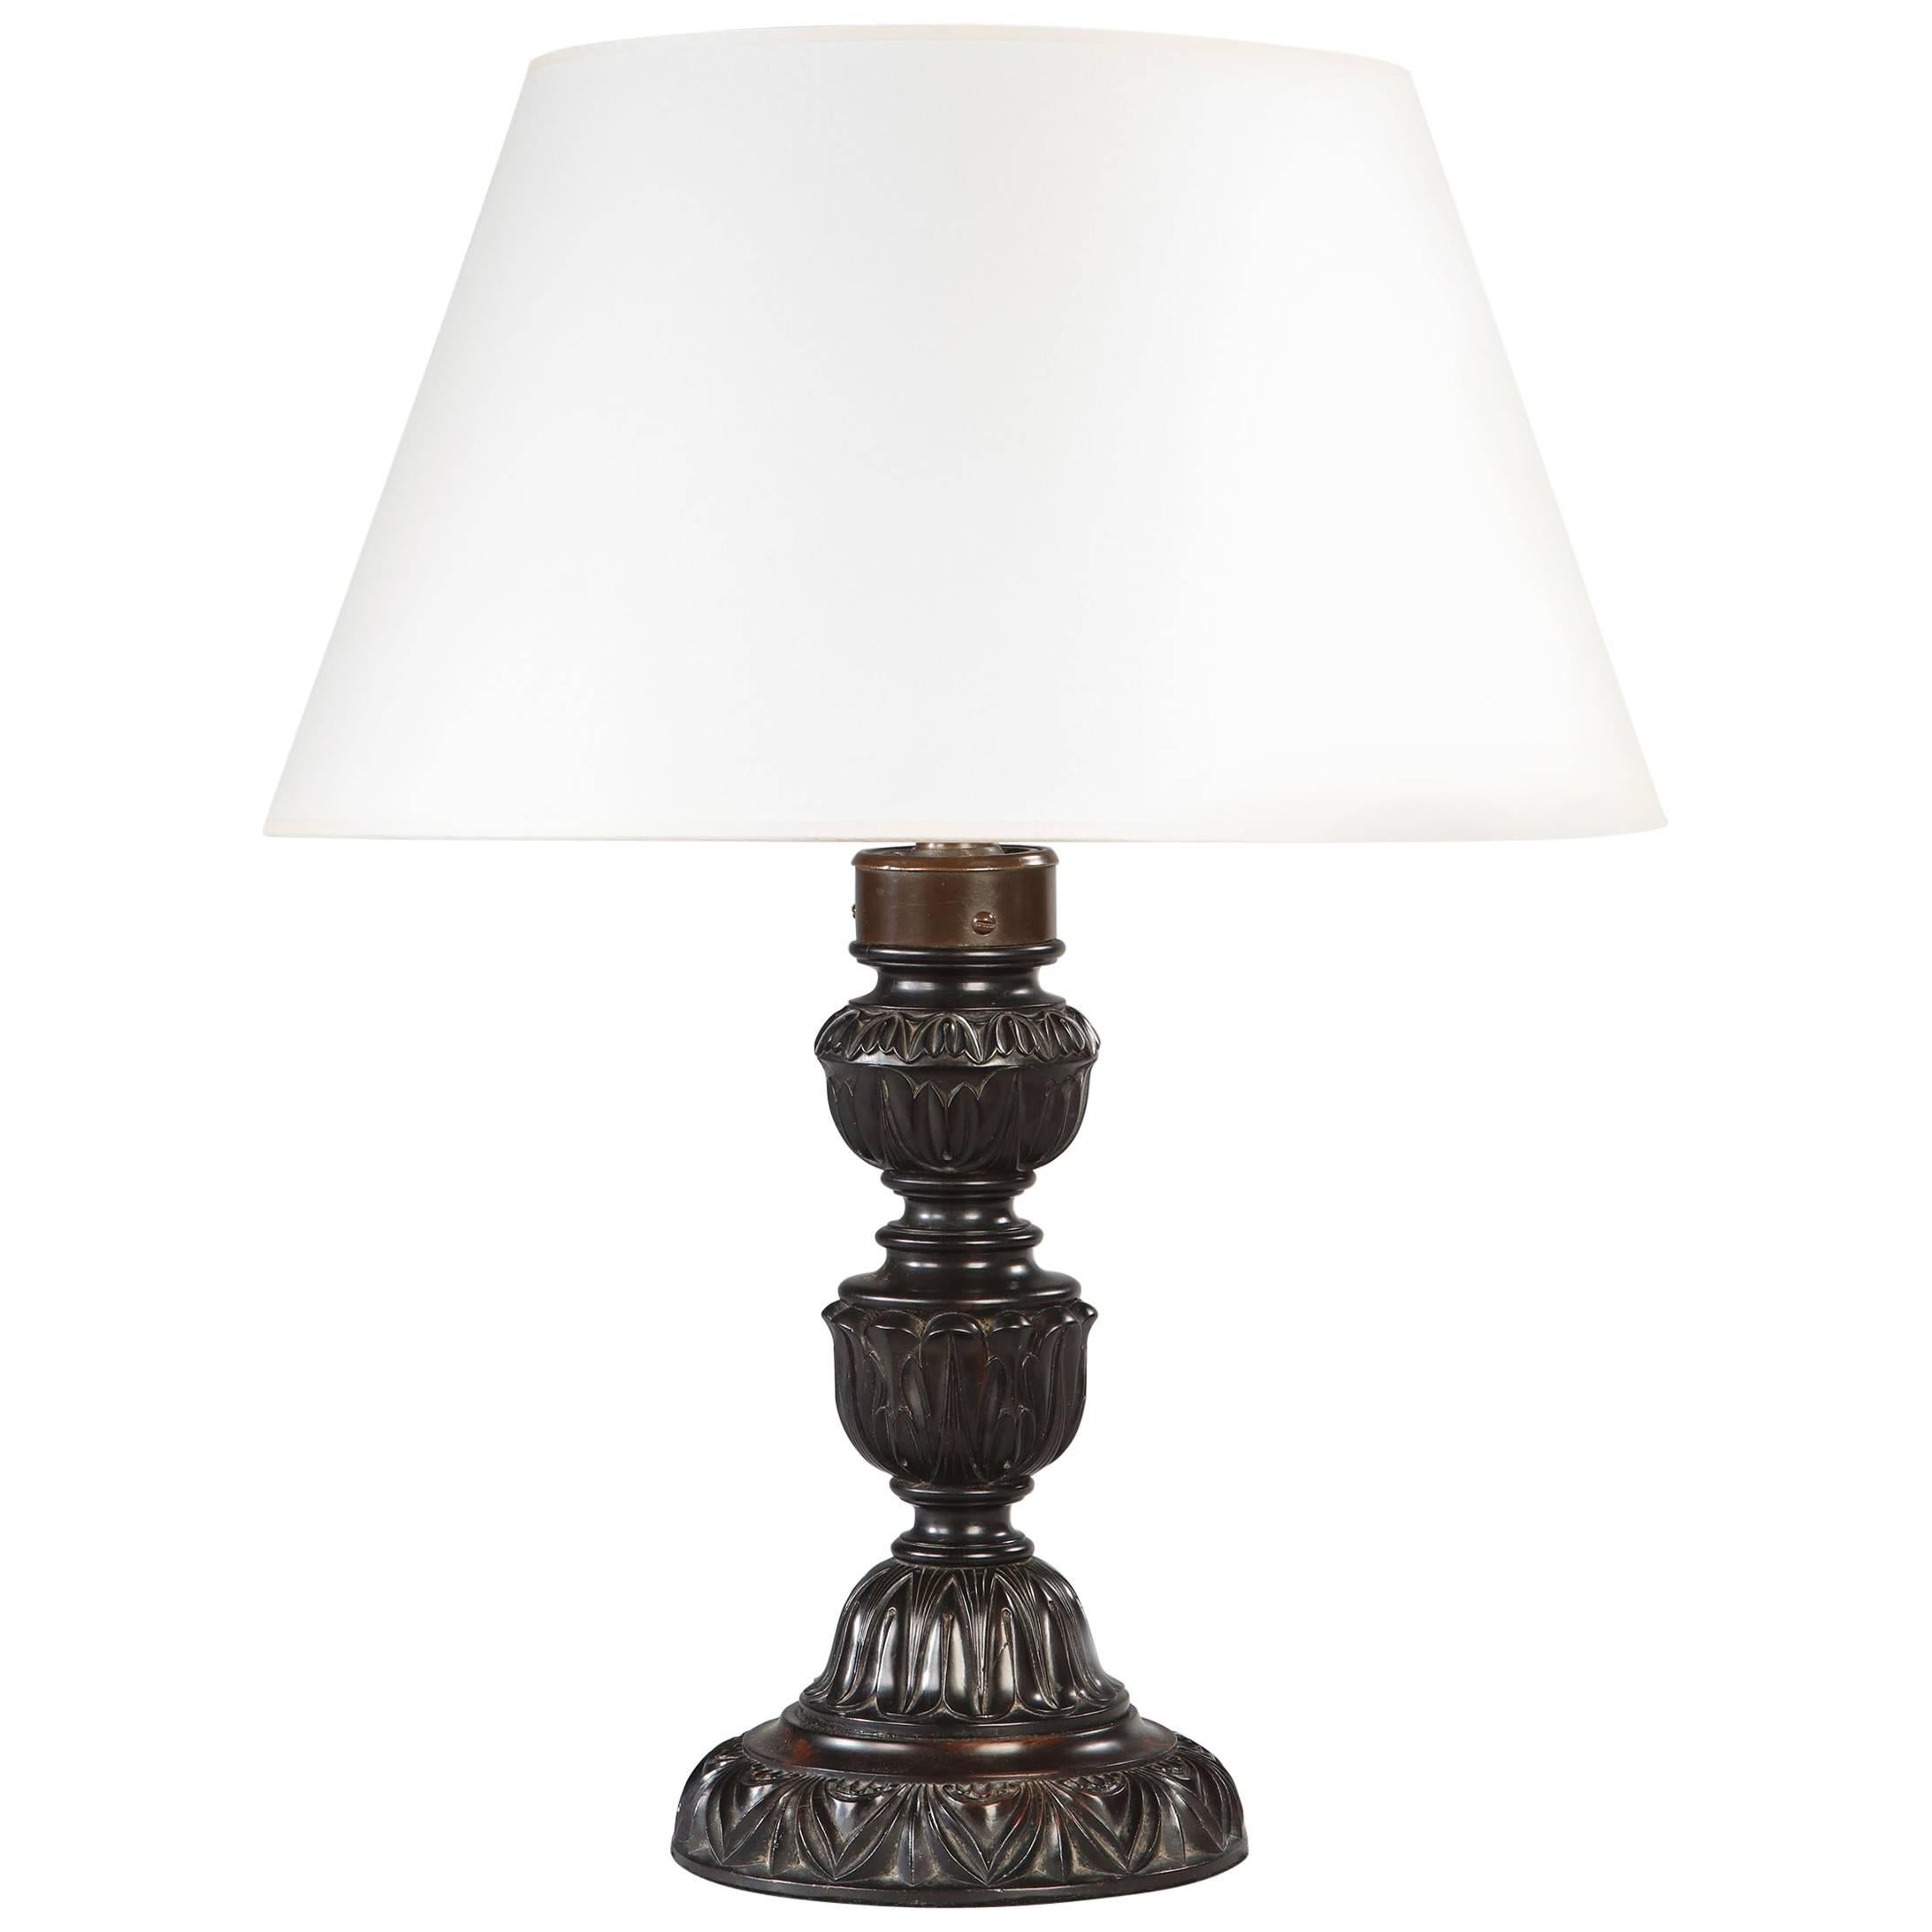 Anglo Sinhalese Carved Ebony Lamp